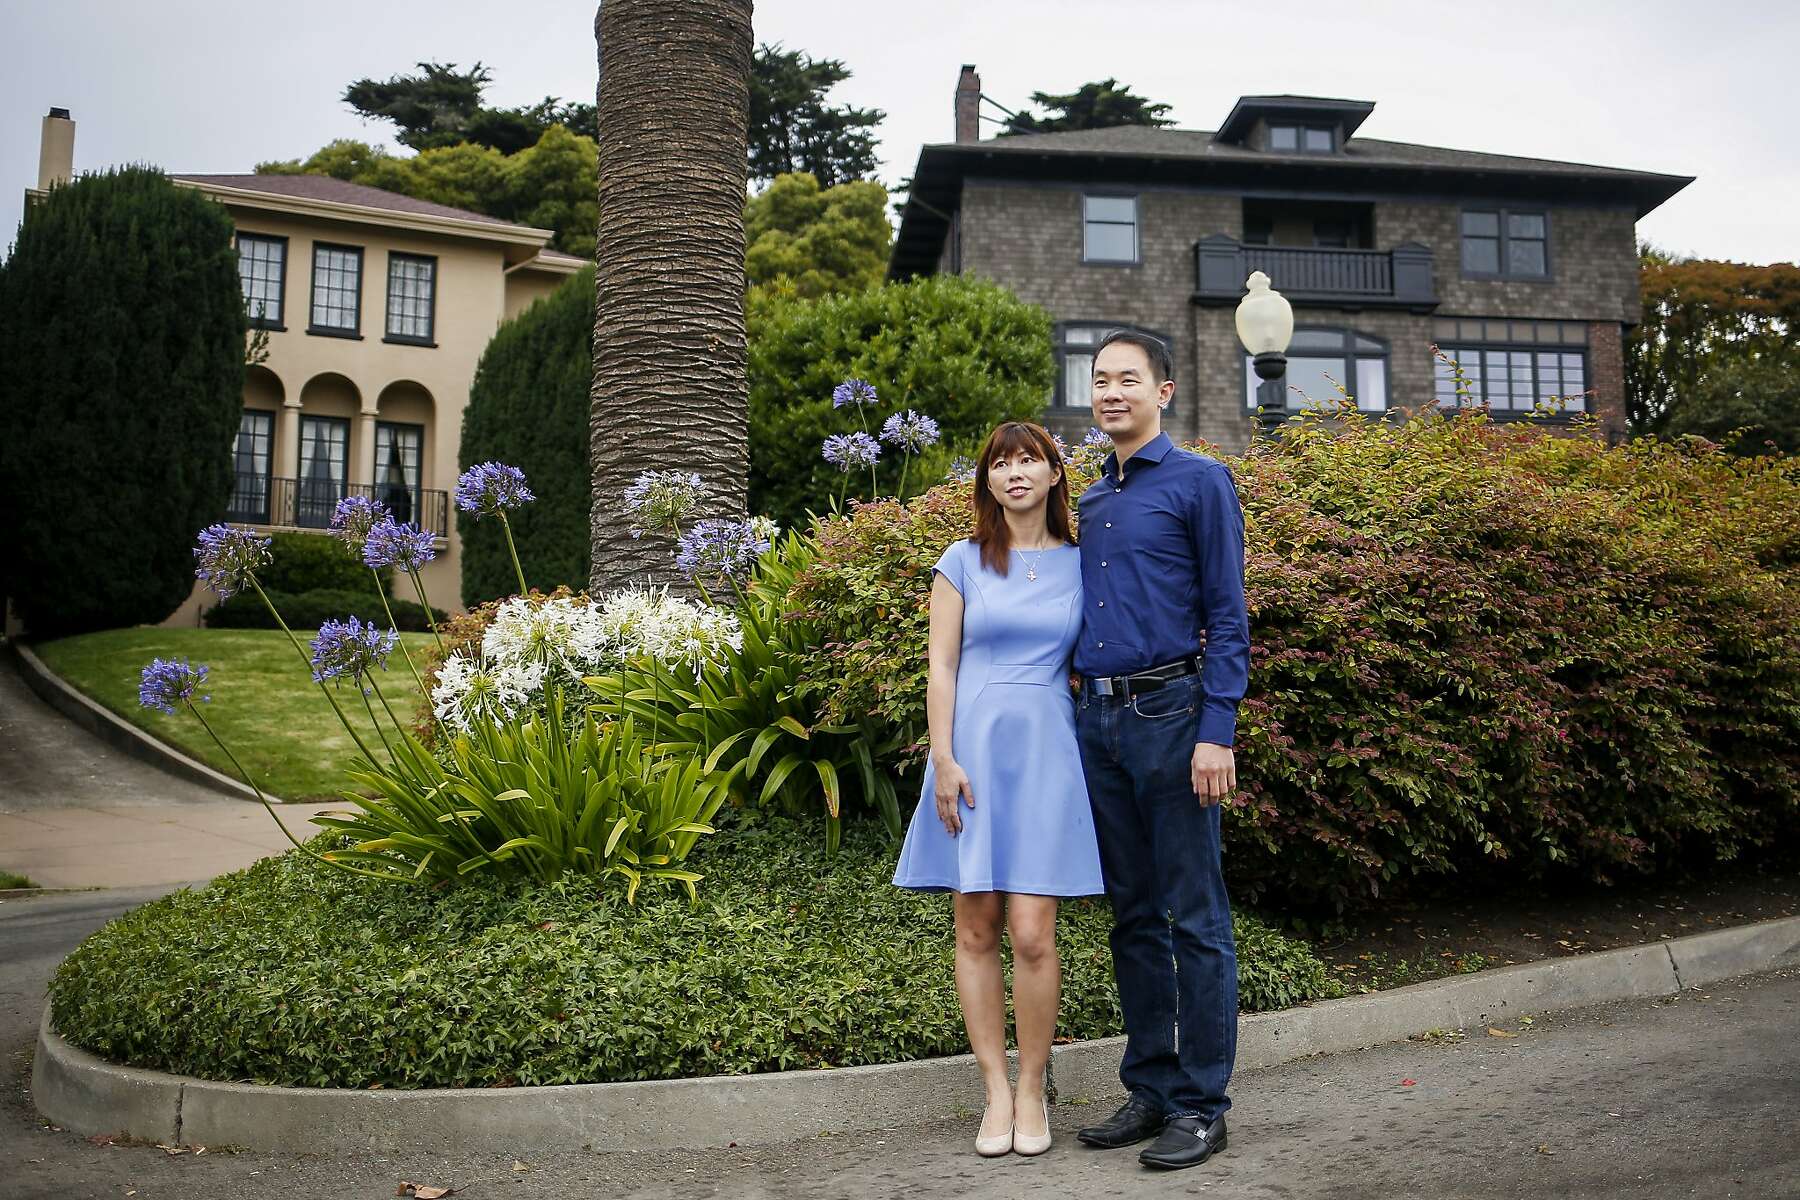 Rich Sf Residents Get A Shock Someone Bought Their Street